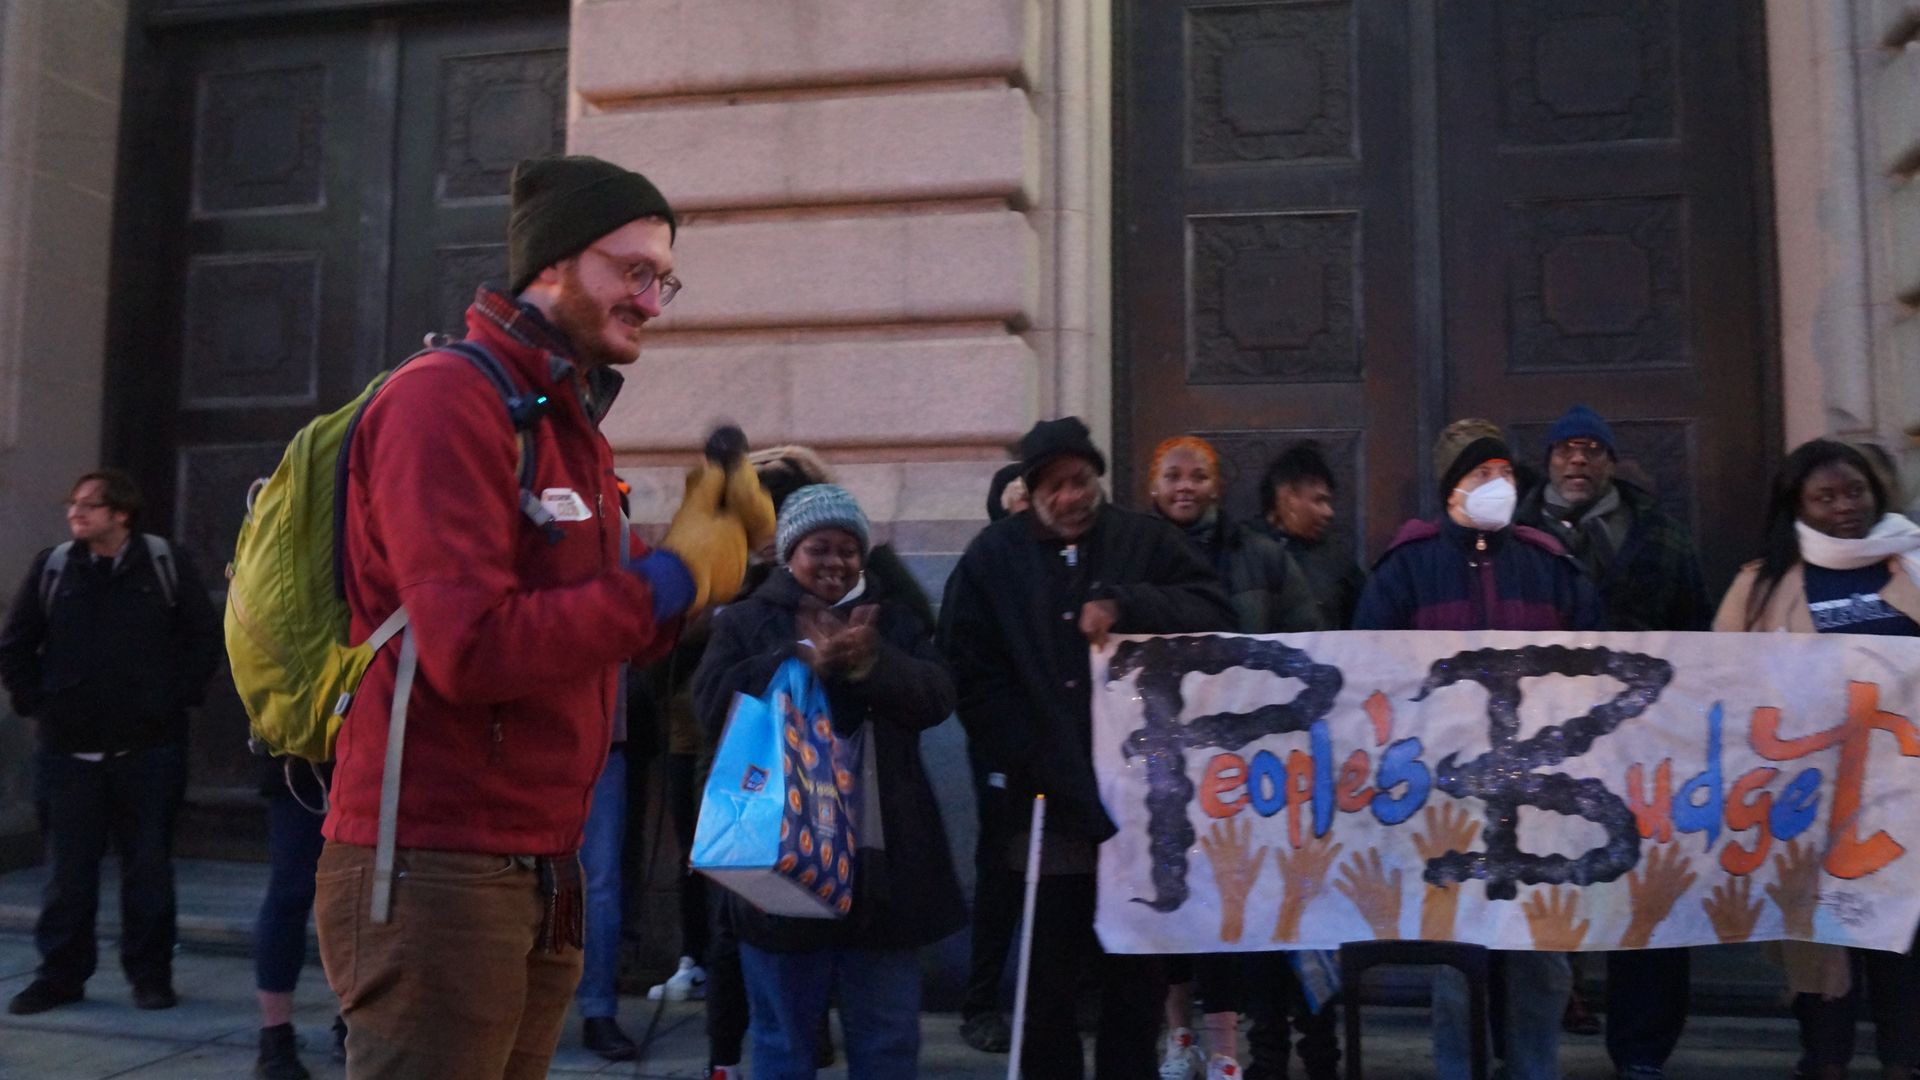 Organizer Jonathan Welle speaks at a PB Cle rally in January, dressed in winter gear on the steps of Cleveland City Hall